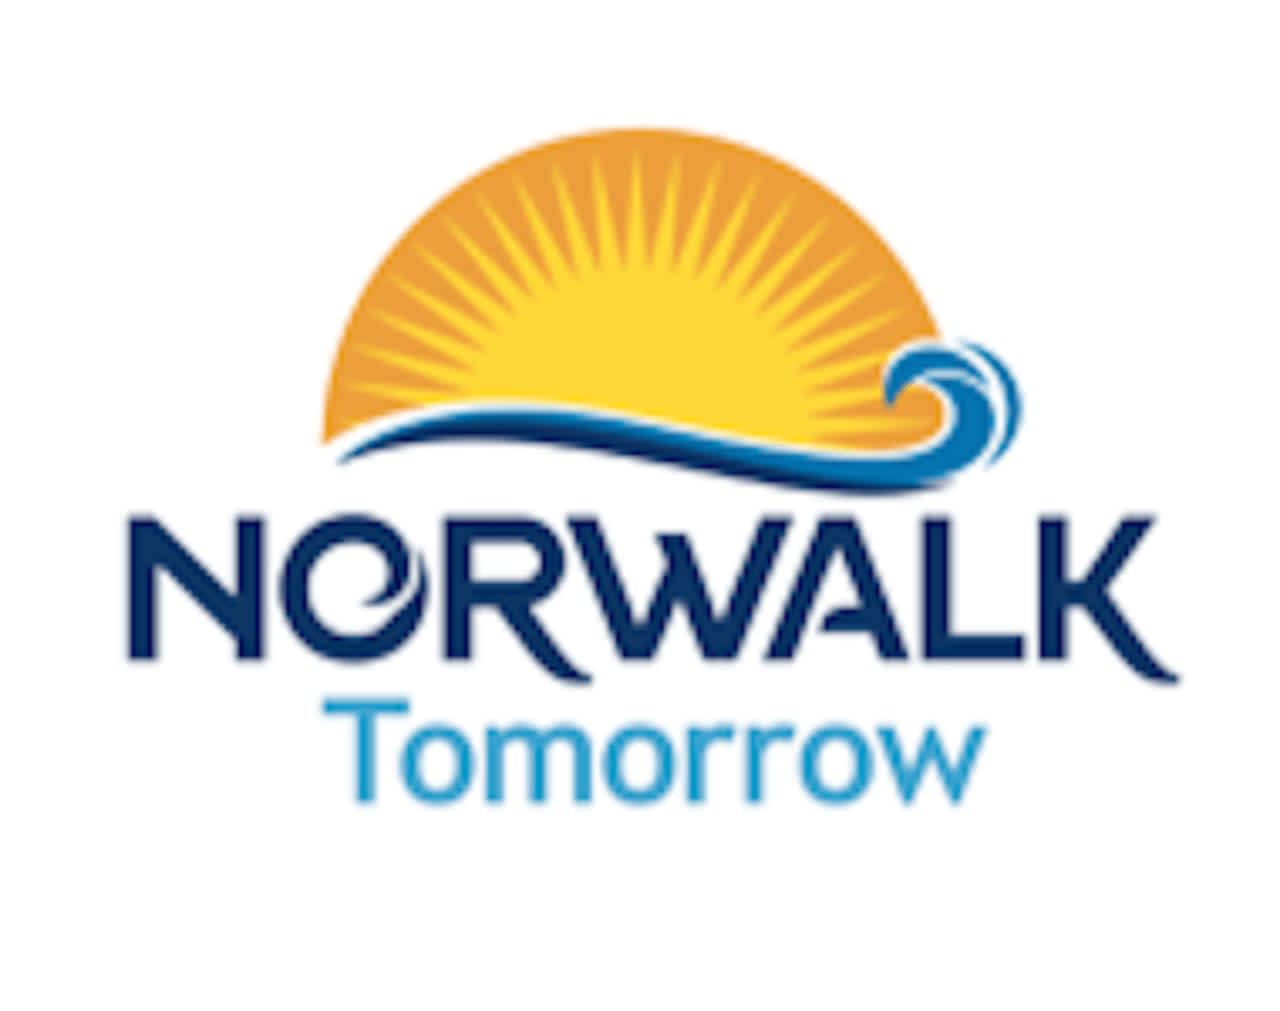 The cit of Norwalk is inviting the public to offer input into the Citywide Plan